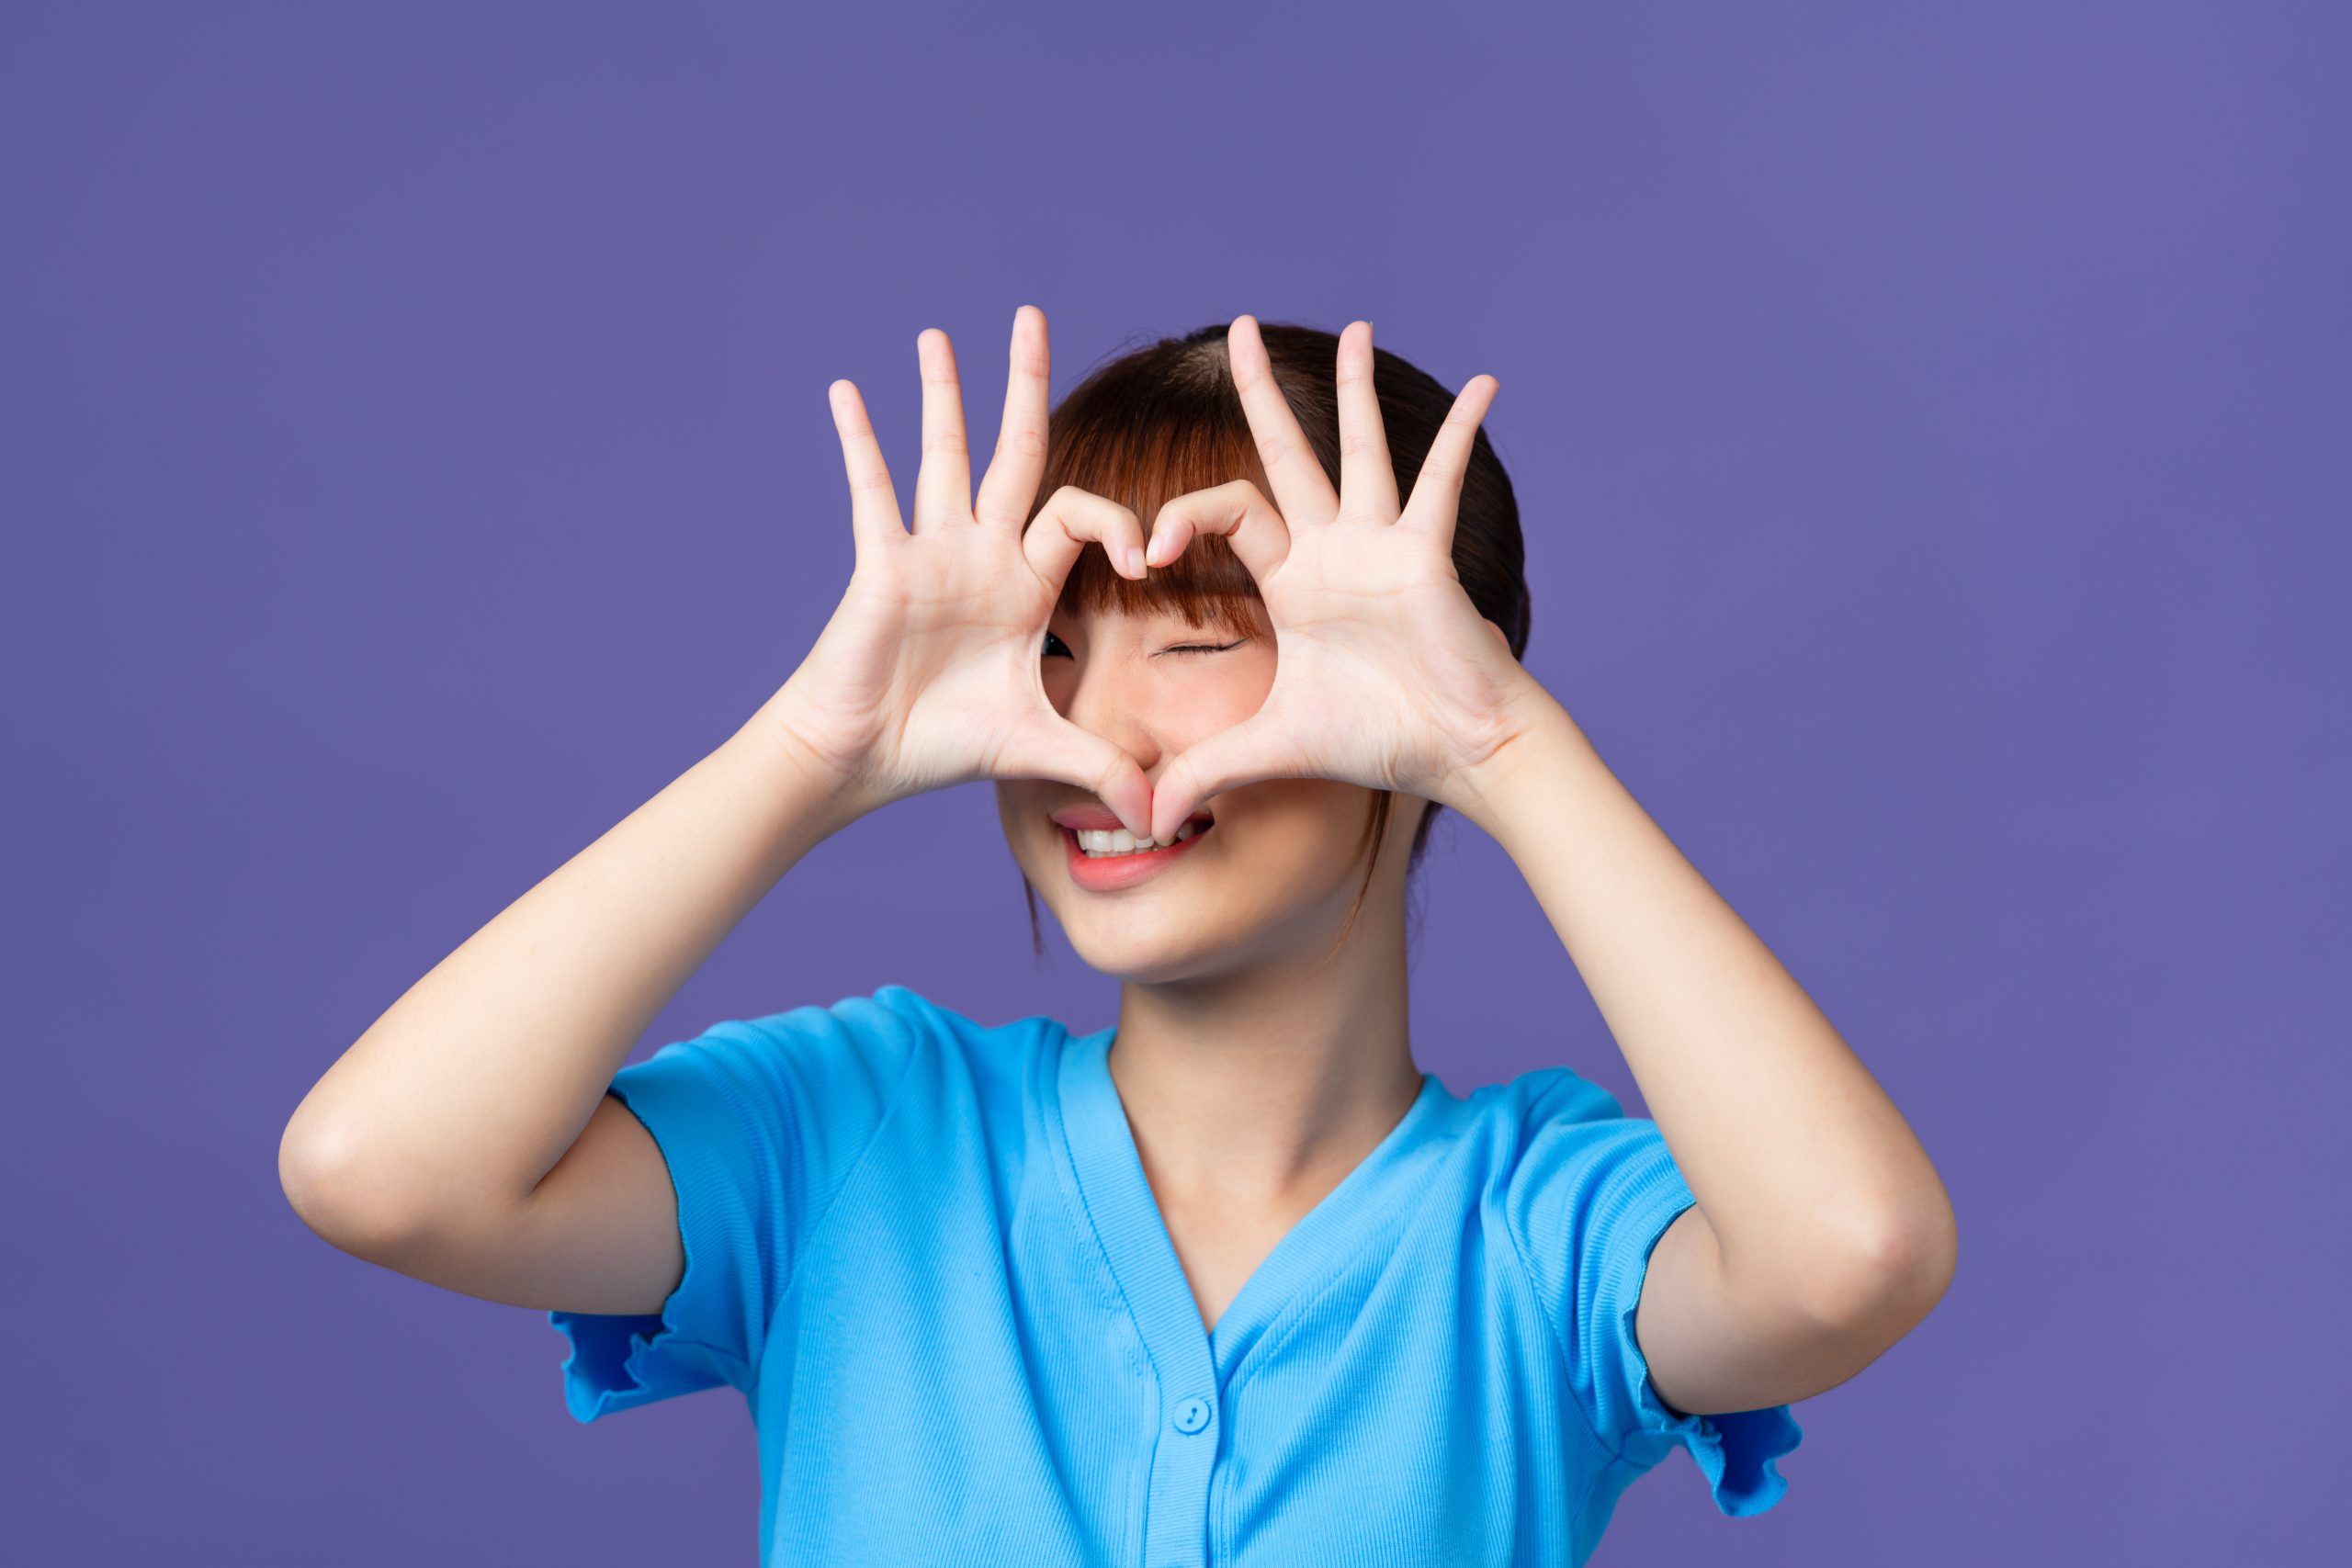 Girl showing heart gesture with fingers isolated over purple background